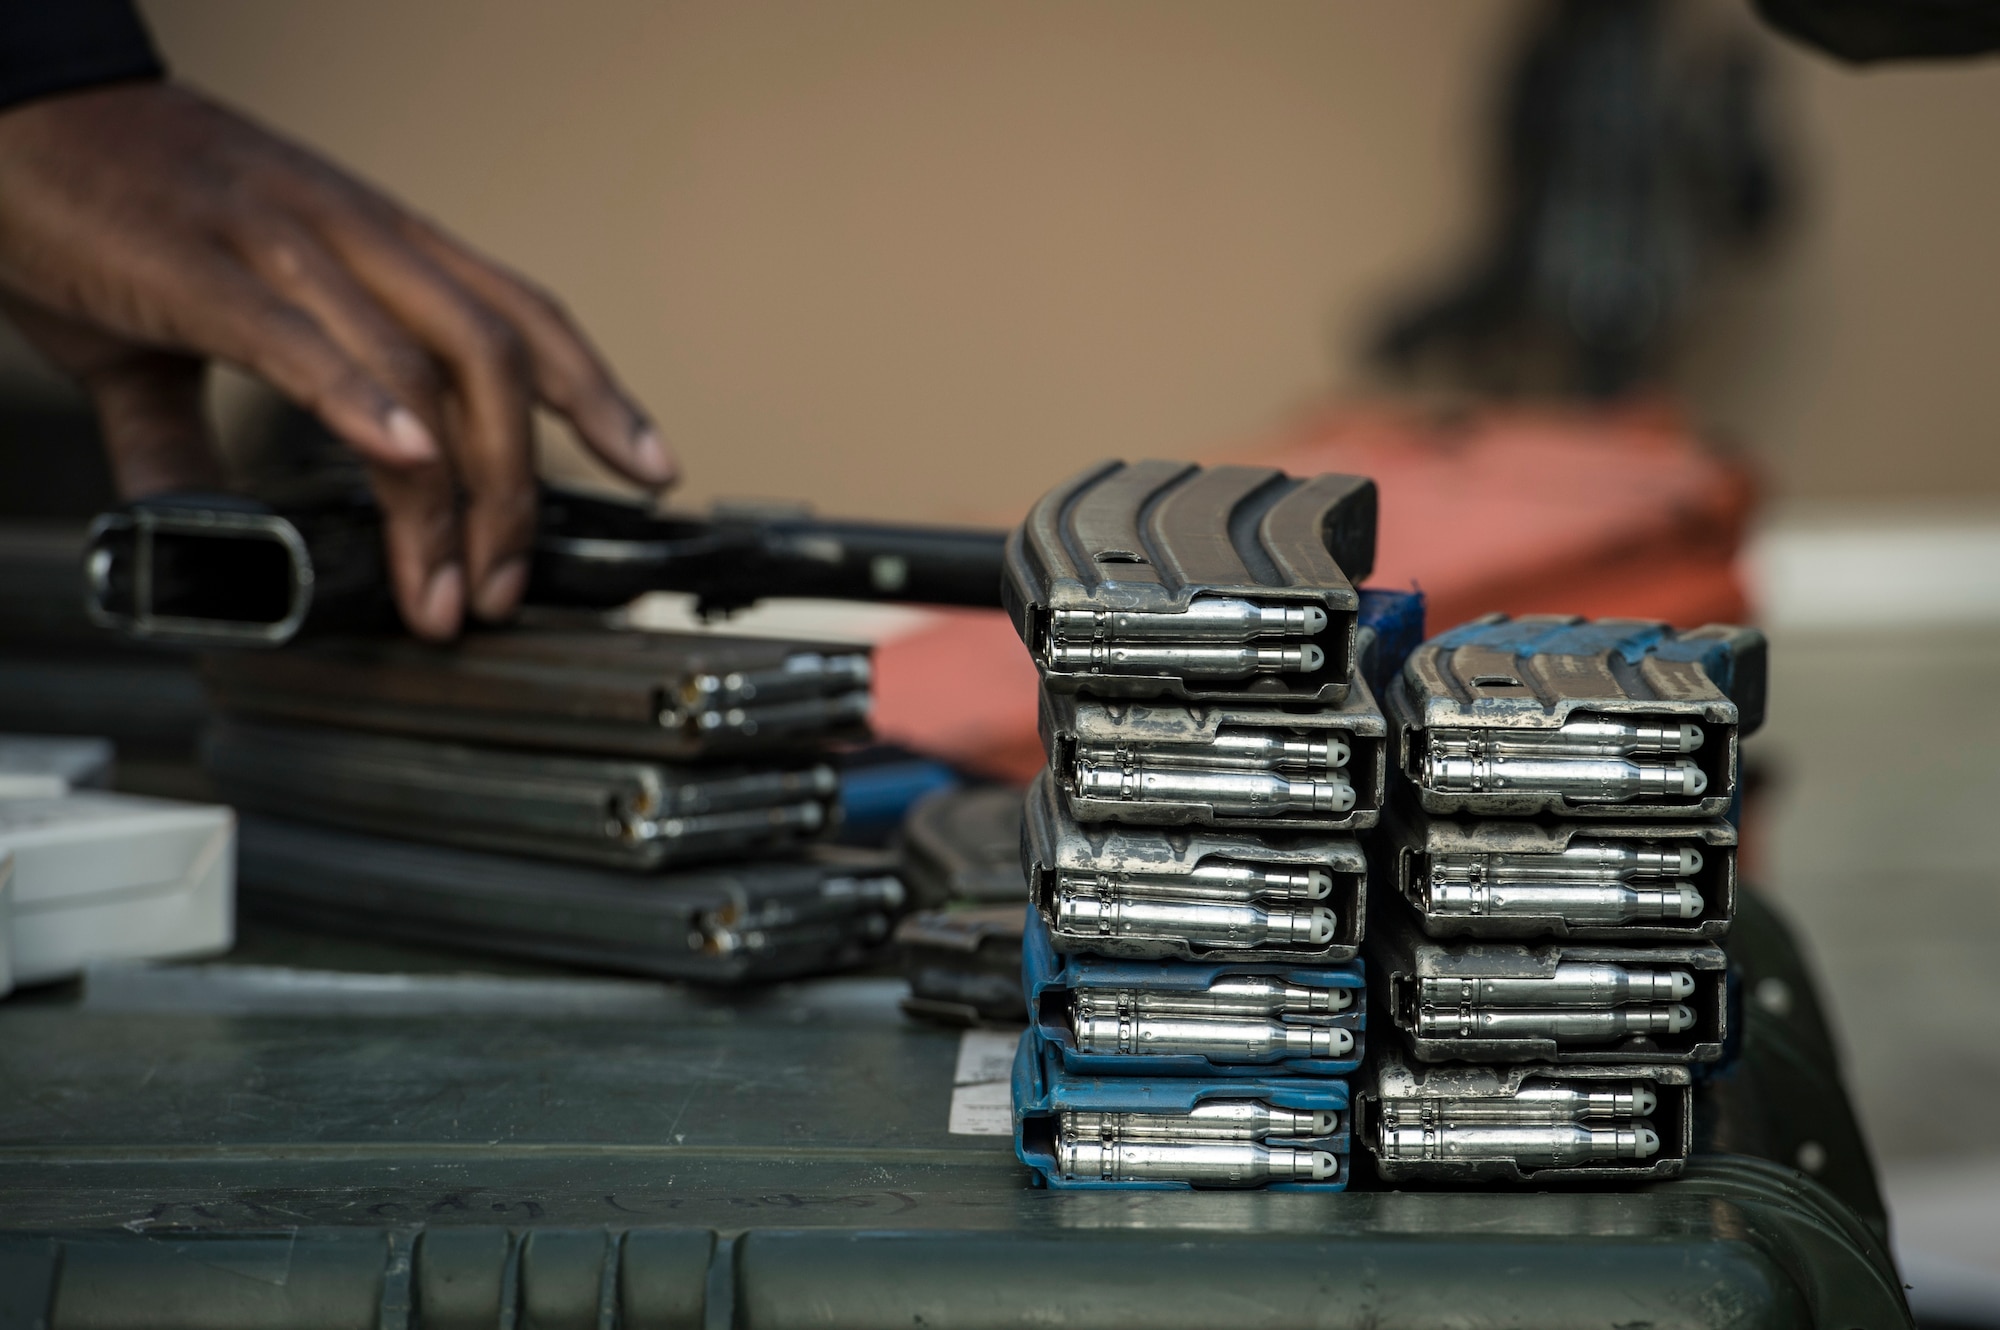 Ammunition magazines rest on a pelican case before a training event, Feb. 22, 2018, at Moody Air Force Base, Ga. “Shoot, move, communicate” is a training event that tests participants on their ability to move from barricade to barricade as a team. While one member provided covering fire the others advanced on the enemy, then retreated from the scenario while they maintained cover fire. Security Forces members would employ these tactics anytime they’re under enemy fire. (U.S. Air Force photo by Senior Airman Janiqua P. Robinson)